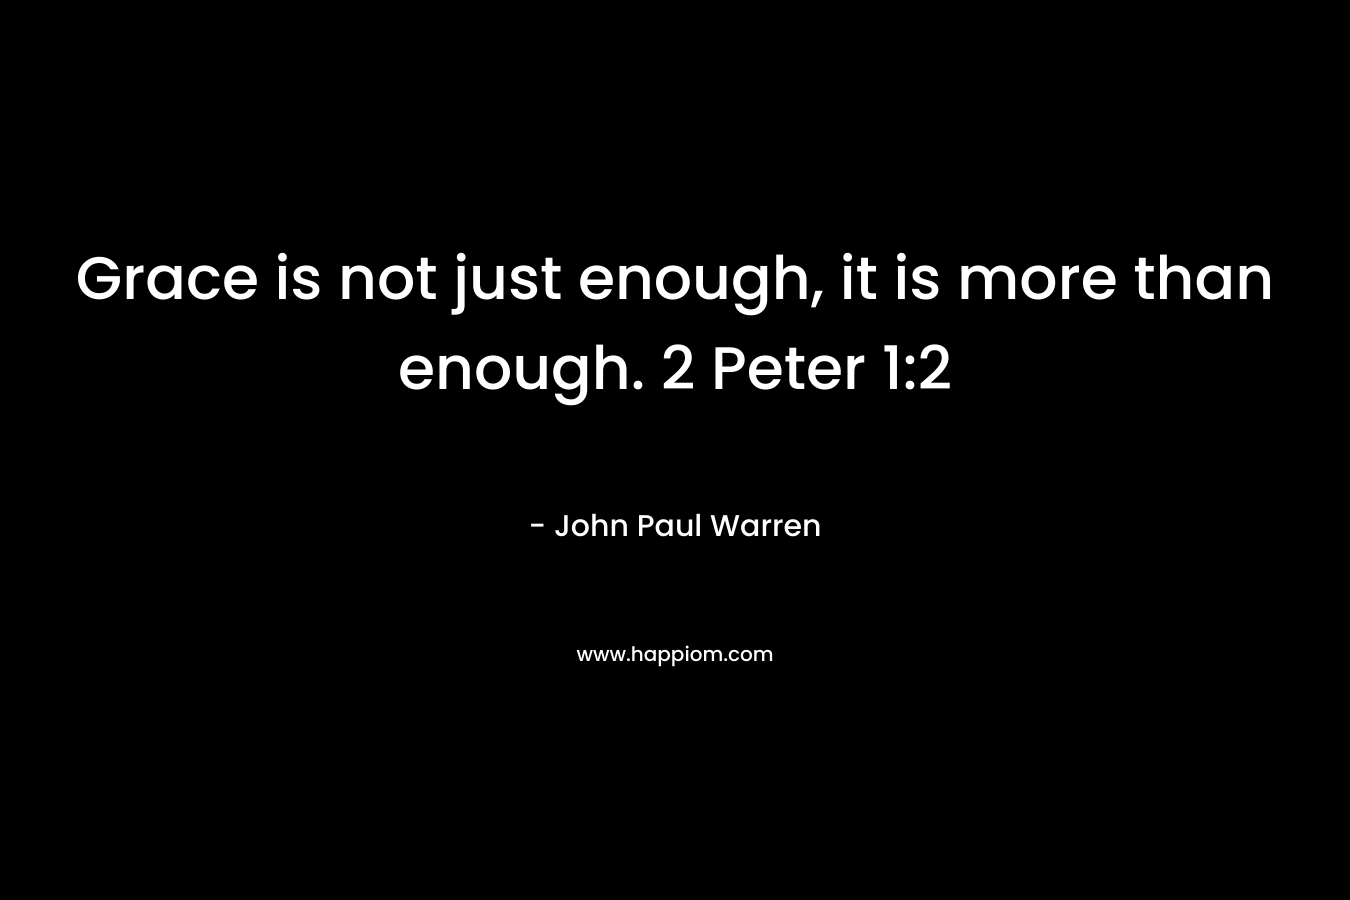 Grace is not just enough, it is more than enough. 2 Peter 1:2